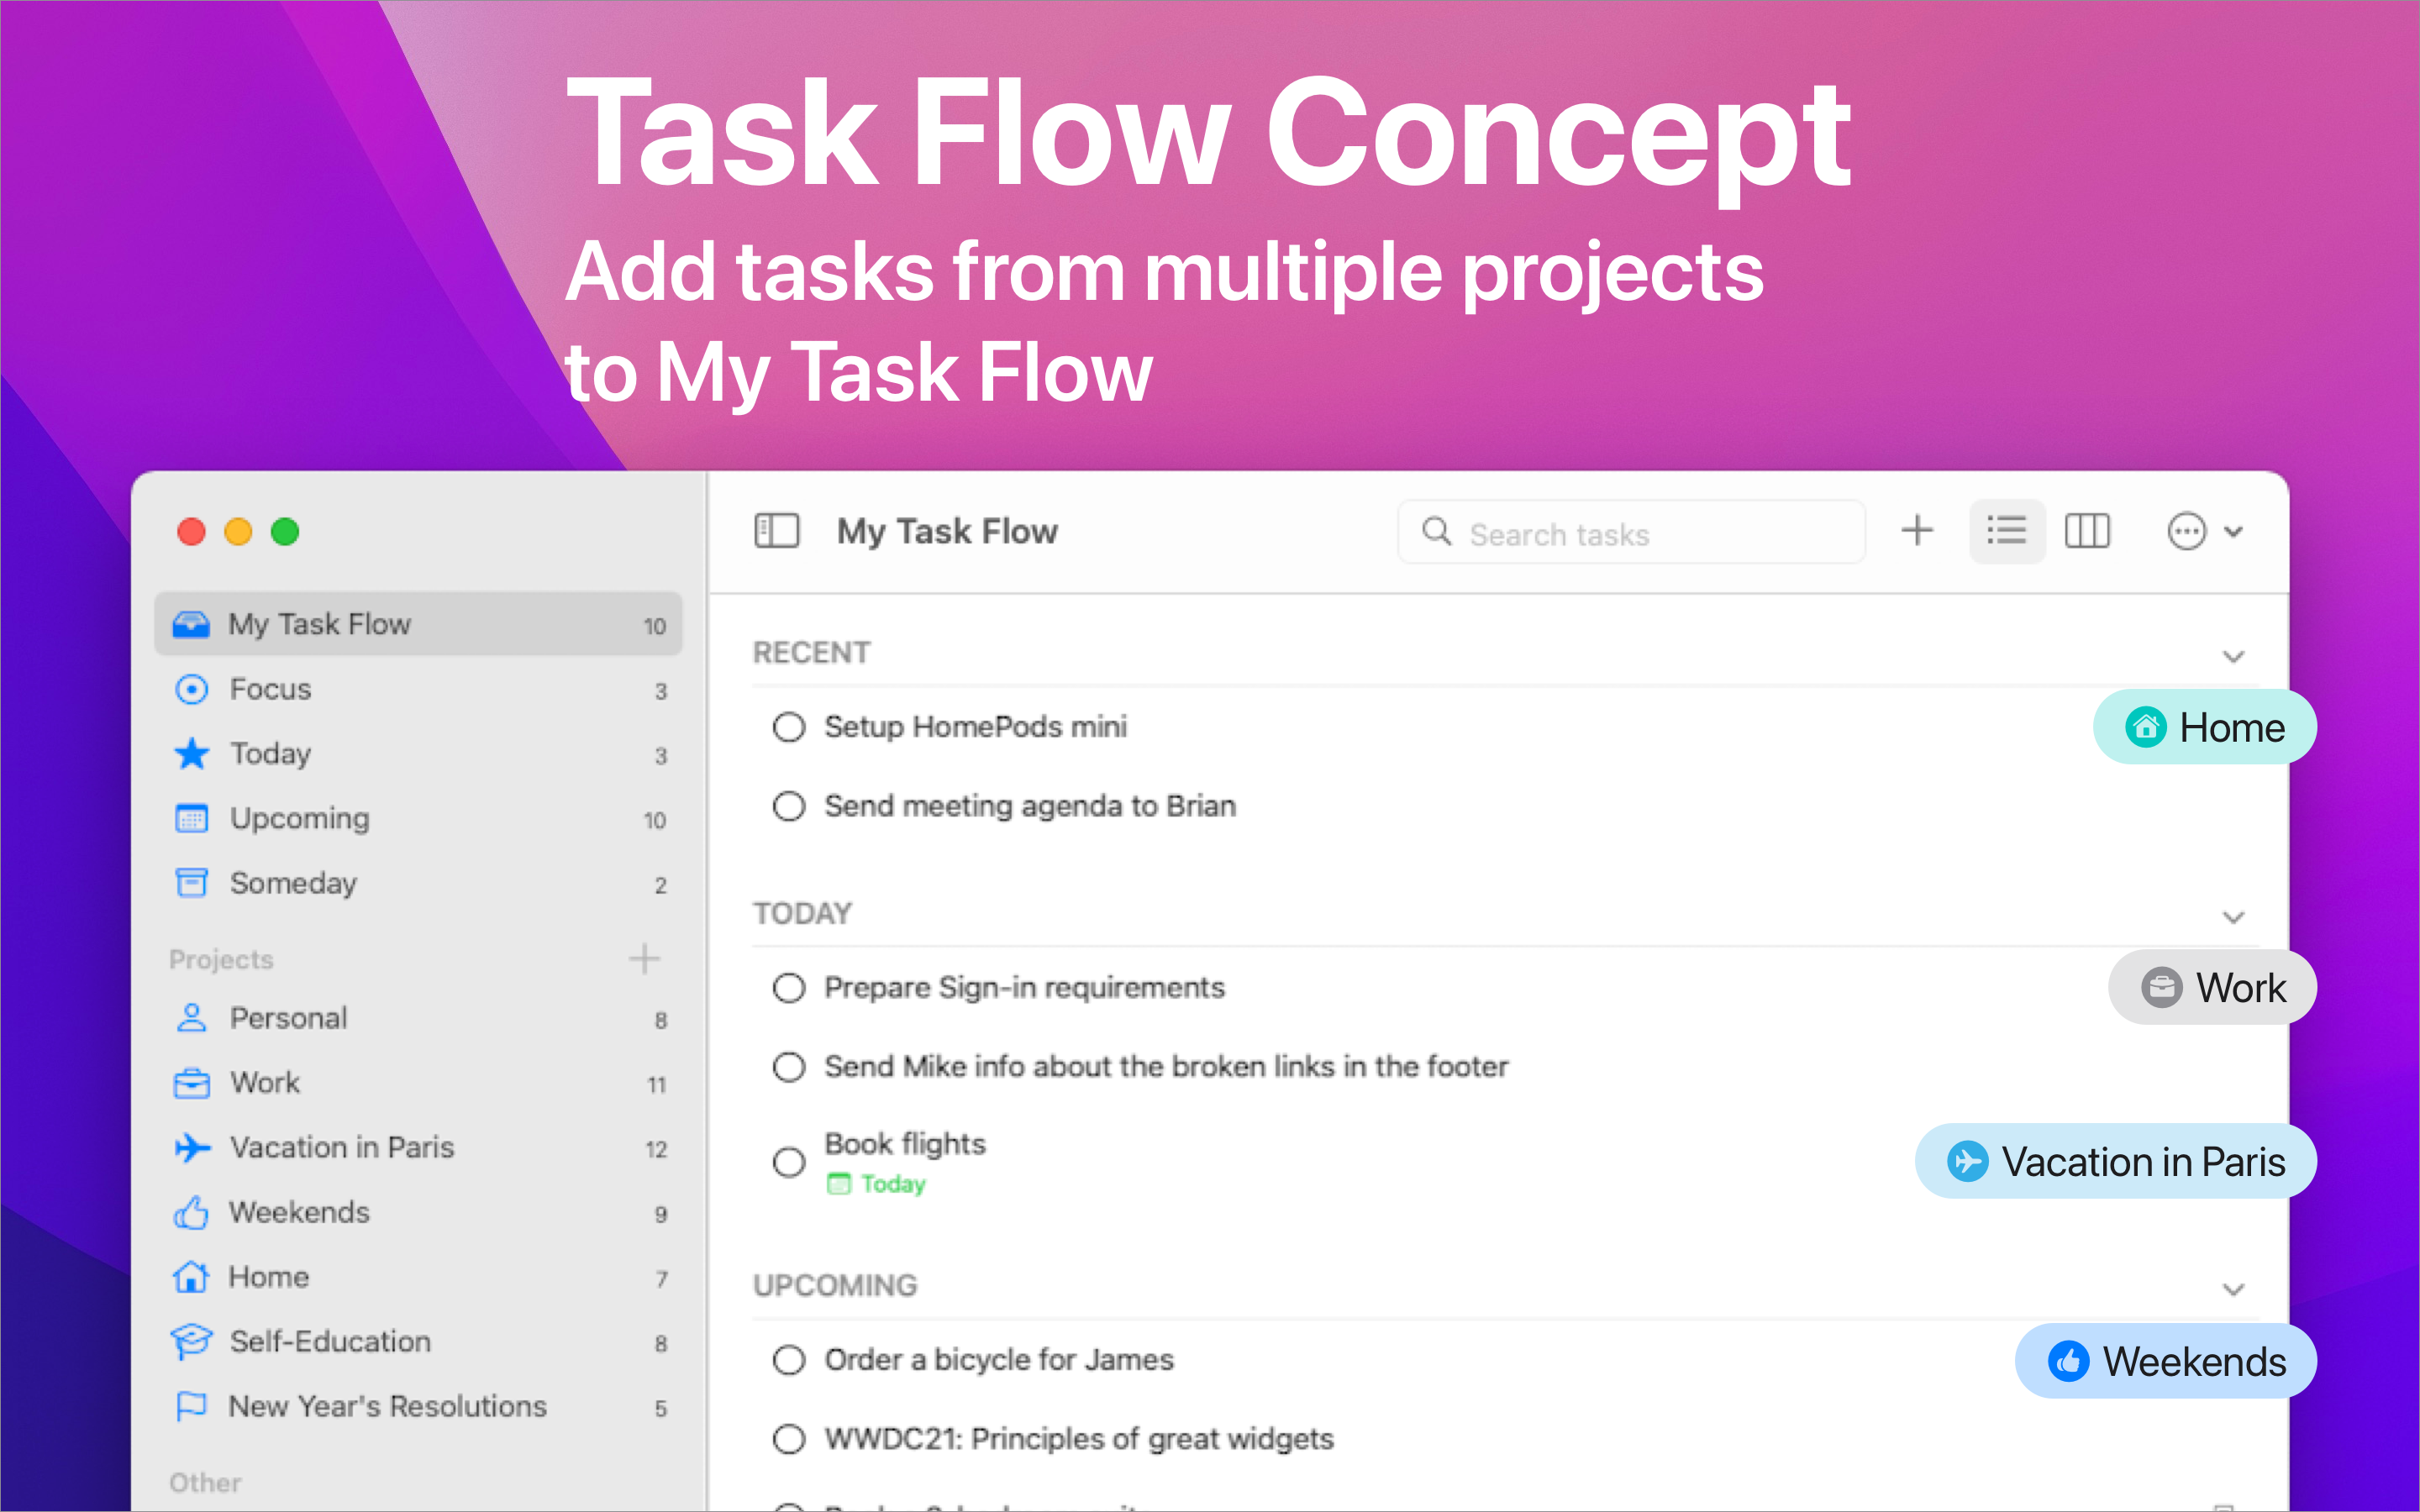 Add Tasks from multiple project to My Task Flow